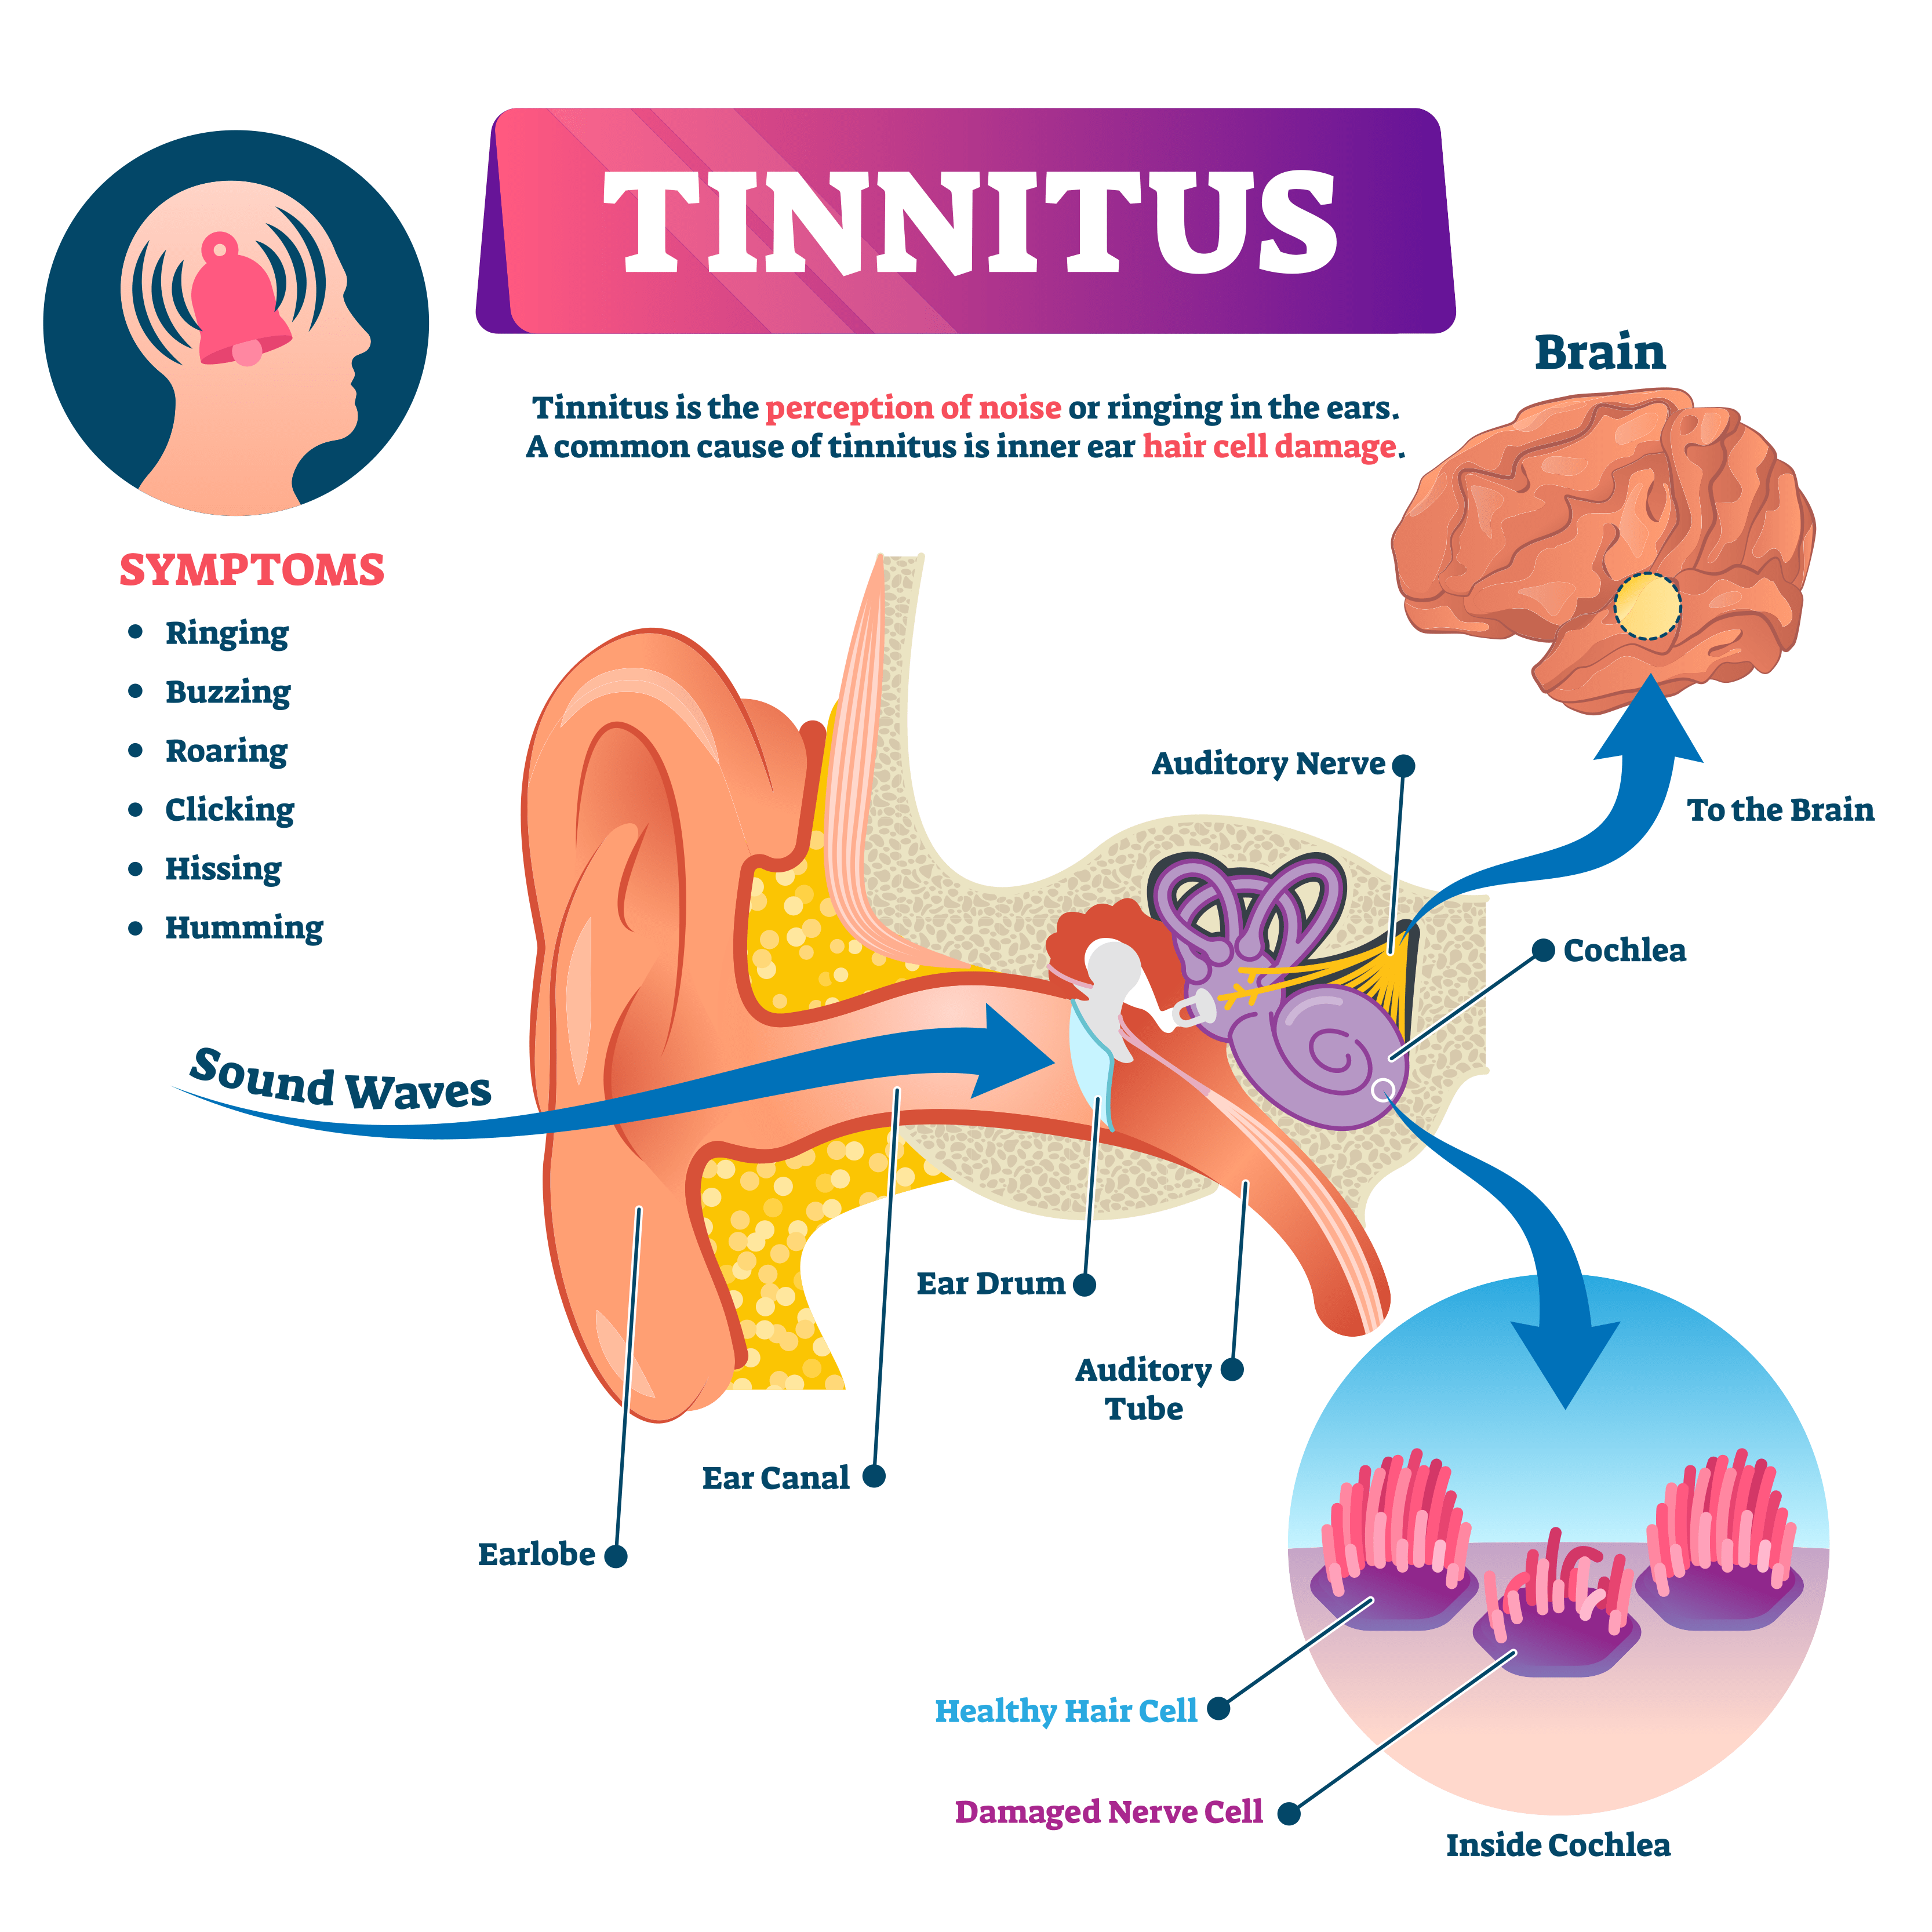 Why Do My Ears Keep Ringing? What You Need to Know About Tinnitus